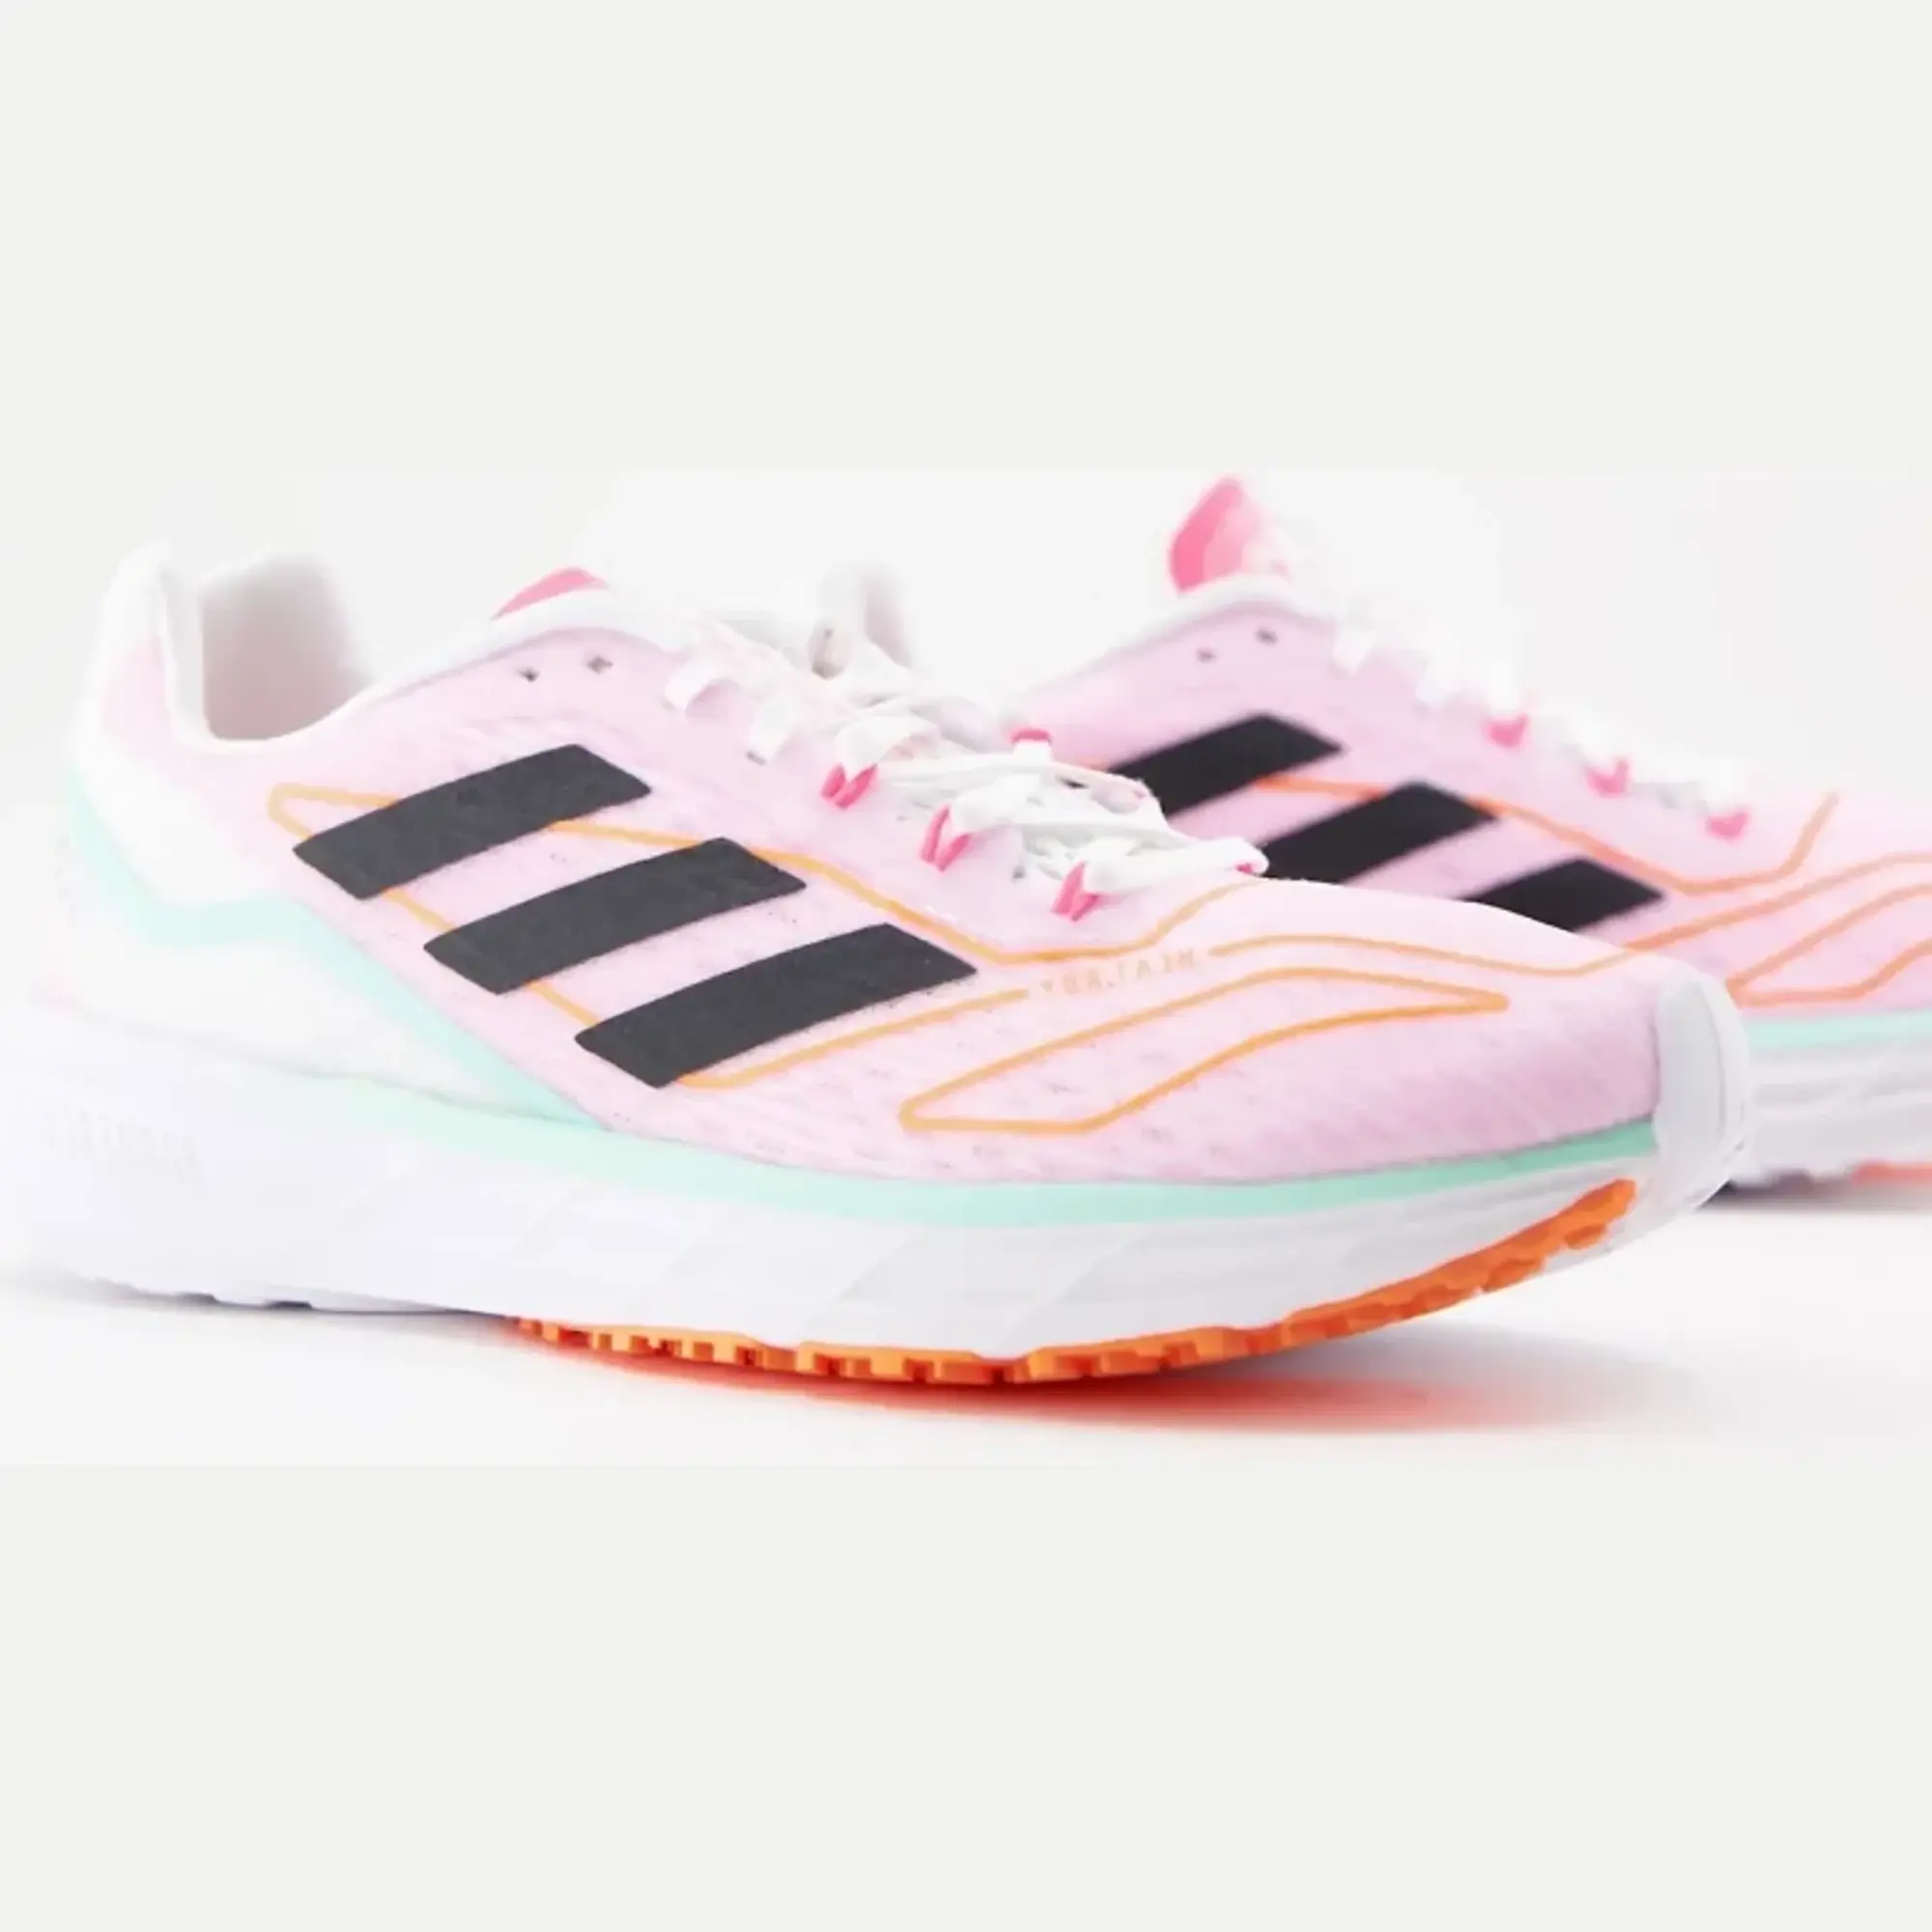 Adidas SL20 SUMMER.RDY Shoes - White/Core Black/Clear Mint - UK 8